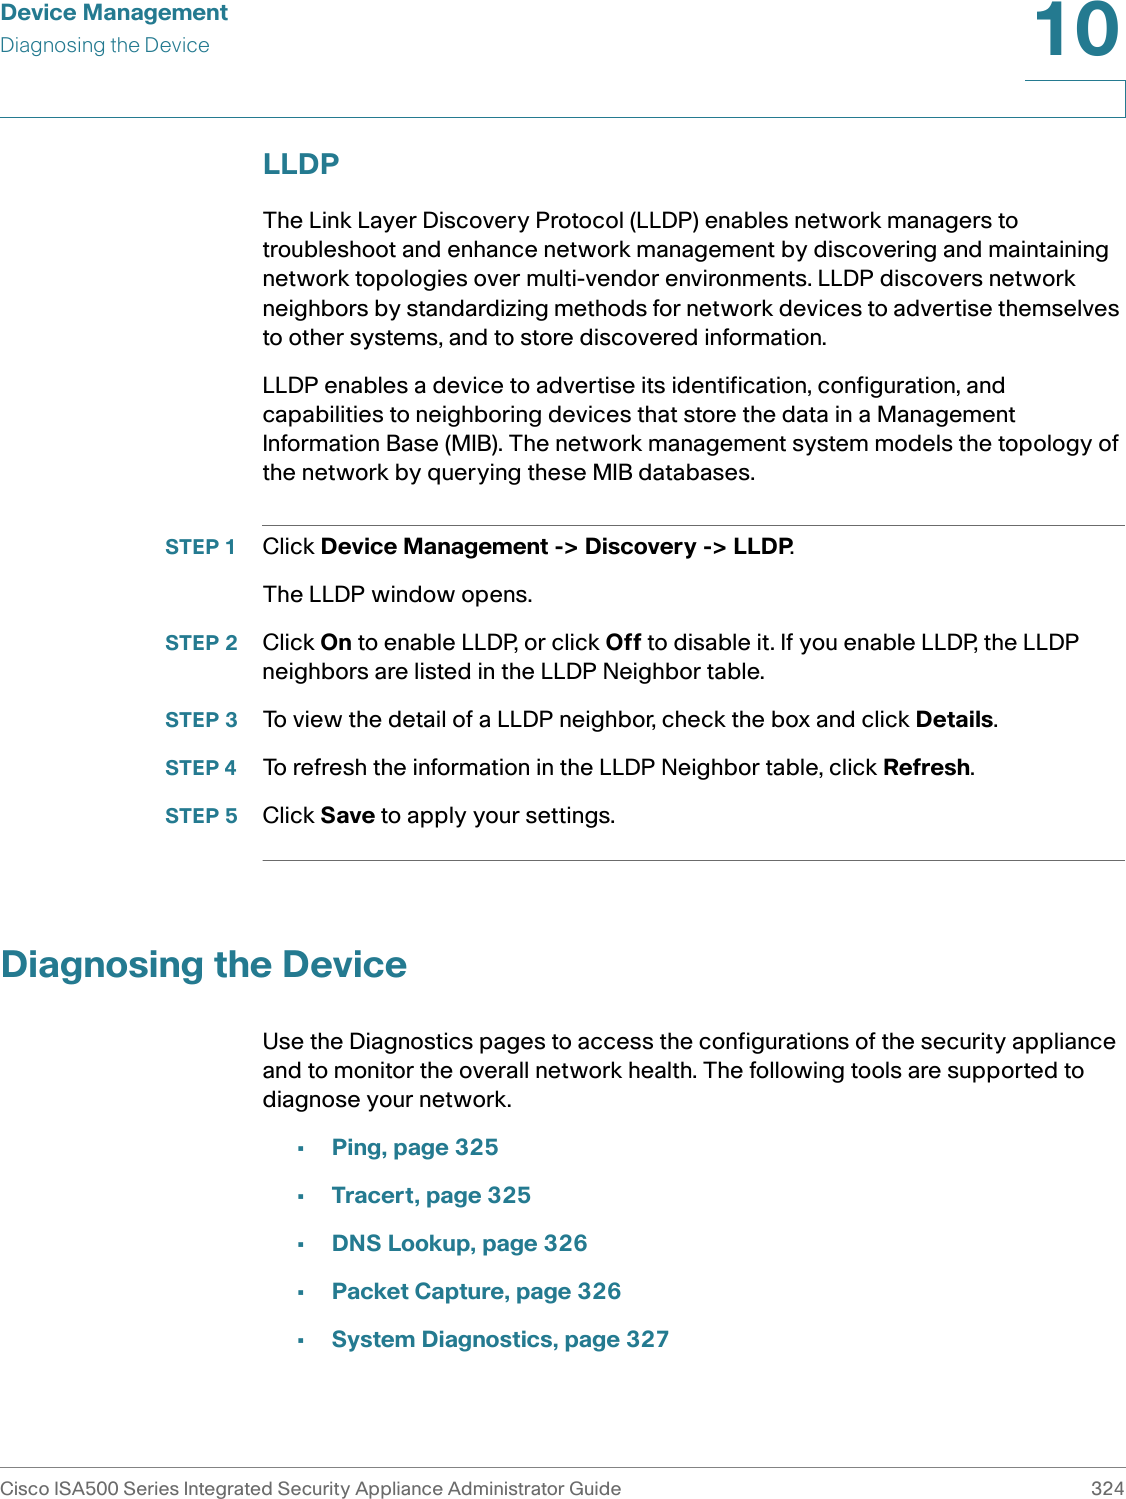 Device ManagementDiagnosing the DeviceCisco ISA500 Series Integrated Security Appliance Administrator Guide 32410 LLDPThe Link Layer Discovery Protocol (LLDP) enables network managers to troubleshoot and enhance network management by discovering and maintaining network topologies over multi-vendor environments. LLDP discovers network neighbors by standardizing methods for network devices to advertise themselves to other systems, and to store discovered information.LLDP enables a device to advertise its identification, configuration, and capabilities to neighboring devices that store the data in a Management Information Base (MIB). The network management system models the topology of the network by querying these MIB databases.STEP 1 Click Device Management -&gt; Discovery -&gt; LLDP.The LLDP window opens.STEP 2 Click On to enable LLDP, or click Off to disable it. If you enable LLDP, the LLDP neighbors are listed in the LLDP Neighbor table. STEP 3 To view the detail of a LLDP neighbor, check the box and click Details. STEP 4 To refresh the information in the LLDP Neighbor table, click Refresh. STEP 5 Click Save to apply your settings. Diagnosing the DeviceUse the Diagnostics pages to access the configurations of the security appliance and to monitor the overall network health. The following tools are supported to diagnose your network. •Ping, page 325•Tracert, page 325•DNS Lookup, page 326•Packet Capture, page 326•System Diagnostics, page 327